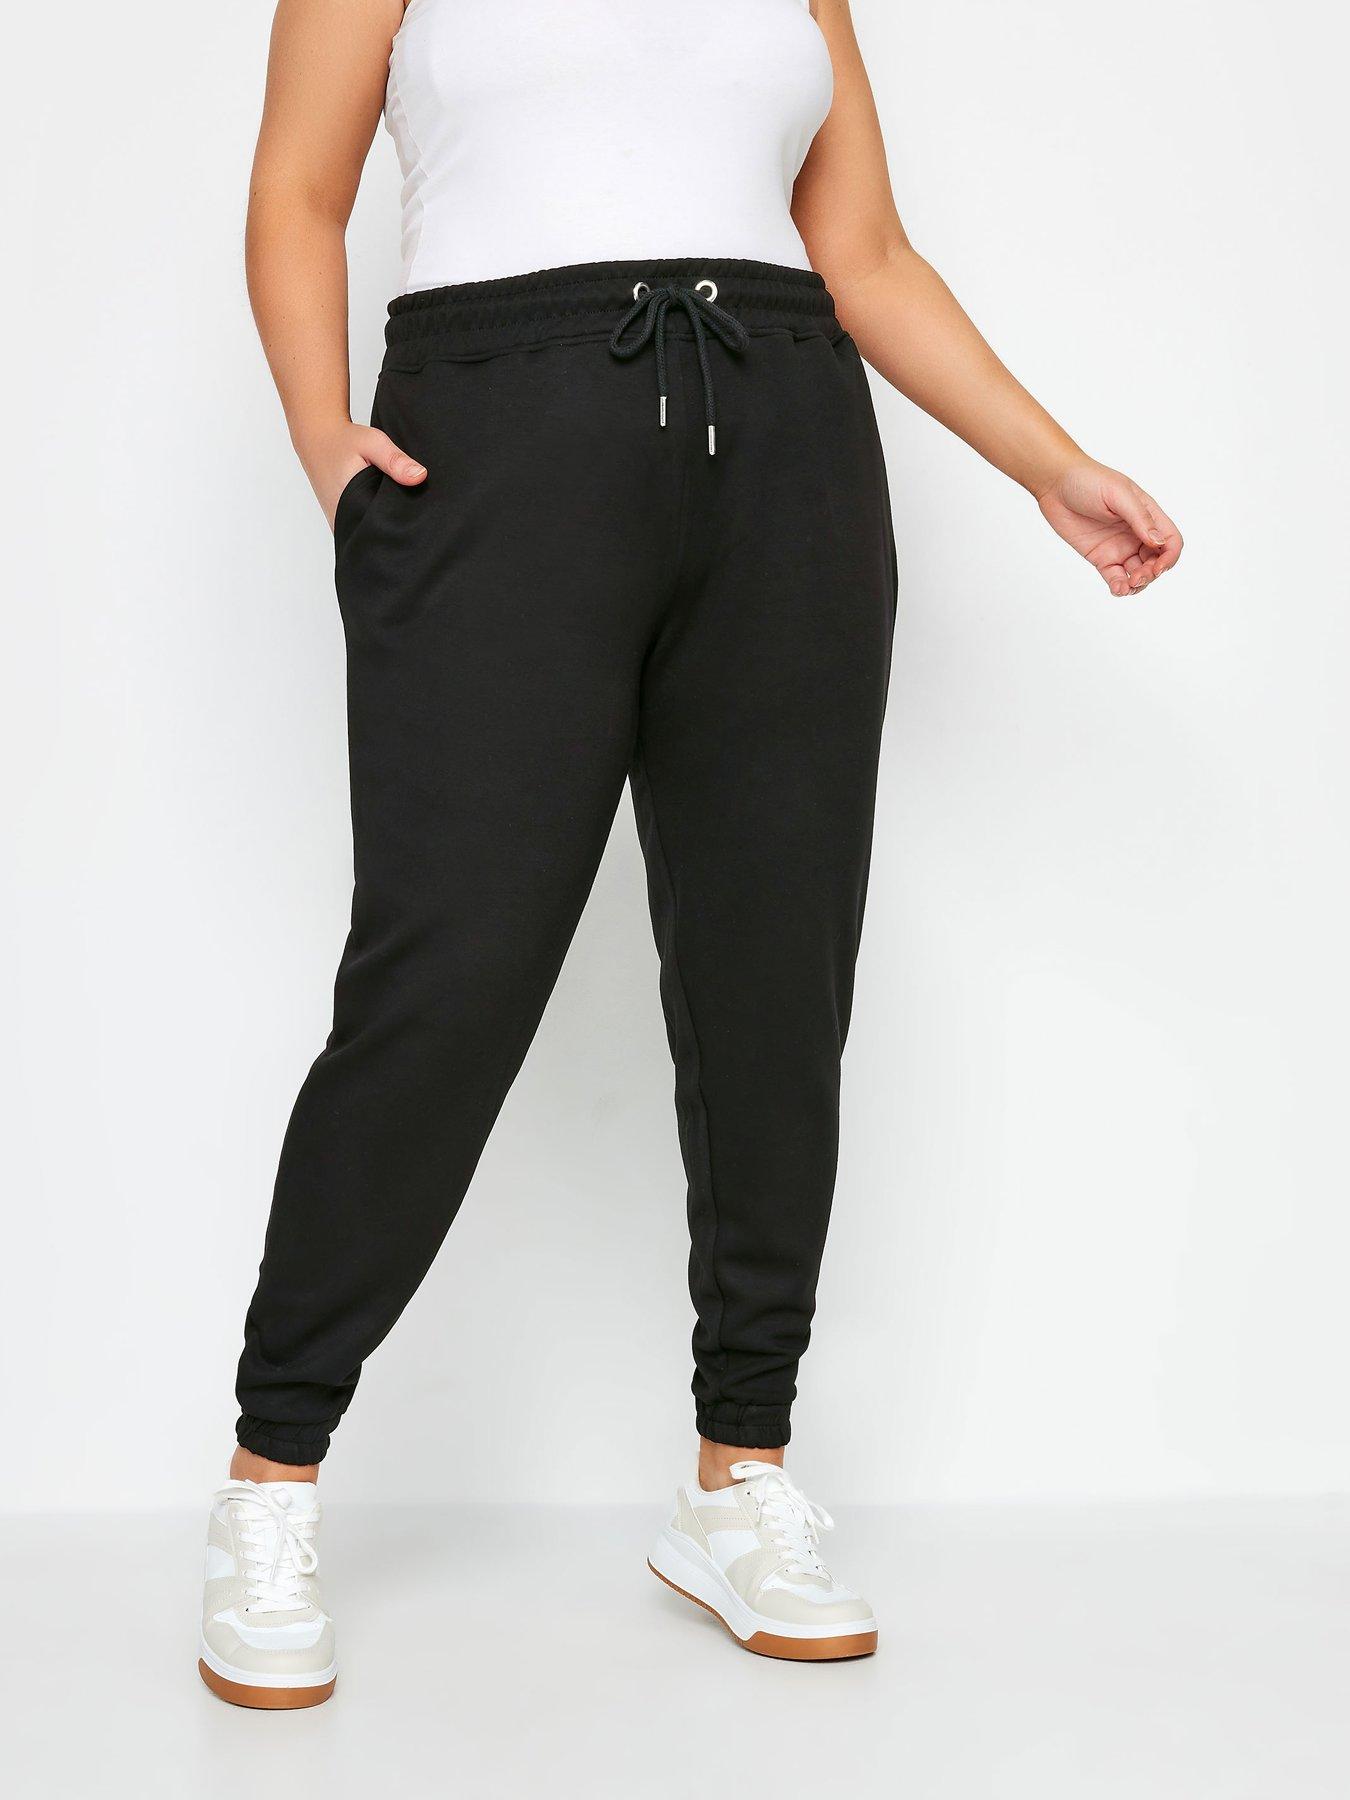 Women's Plus Size Joggers with Elastic Hem from ROYALTY – Royalty For me